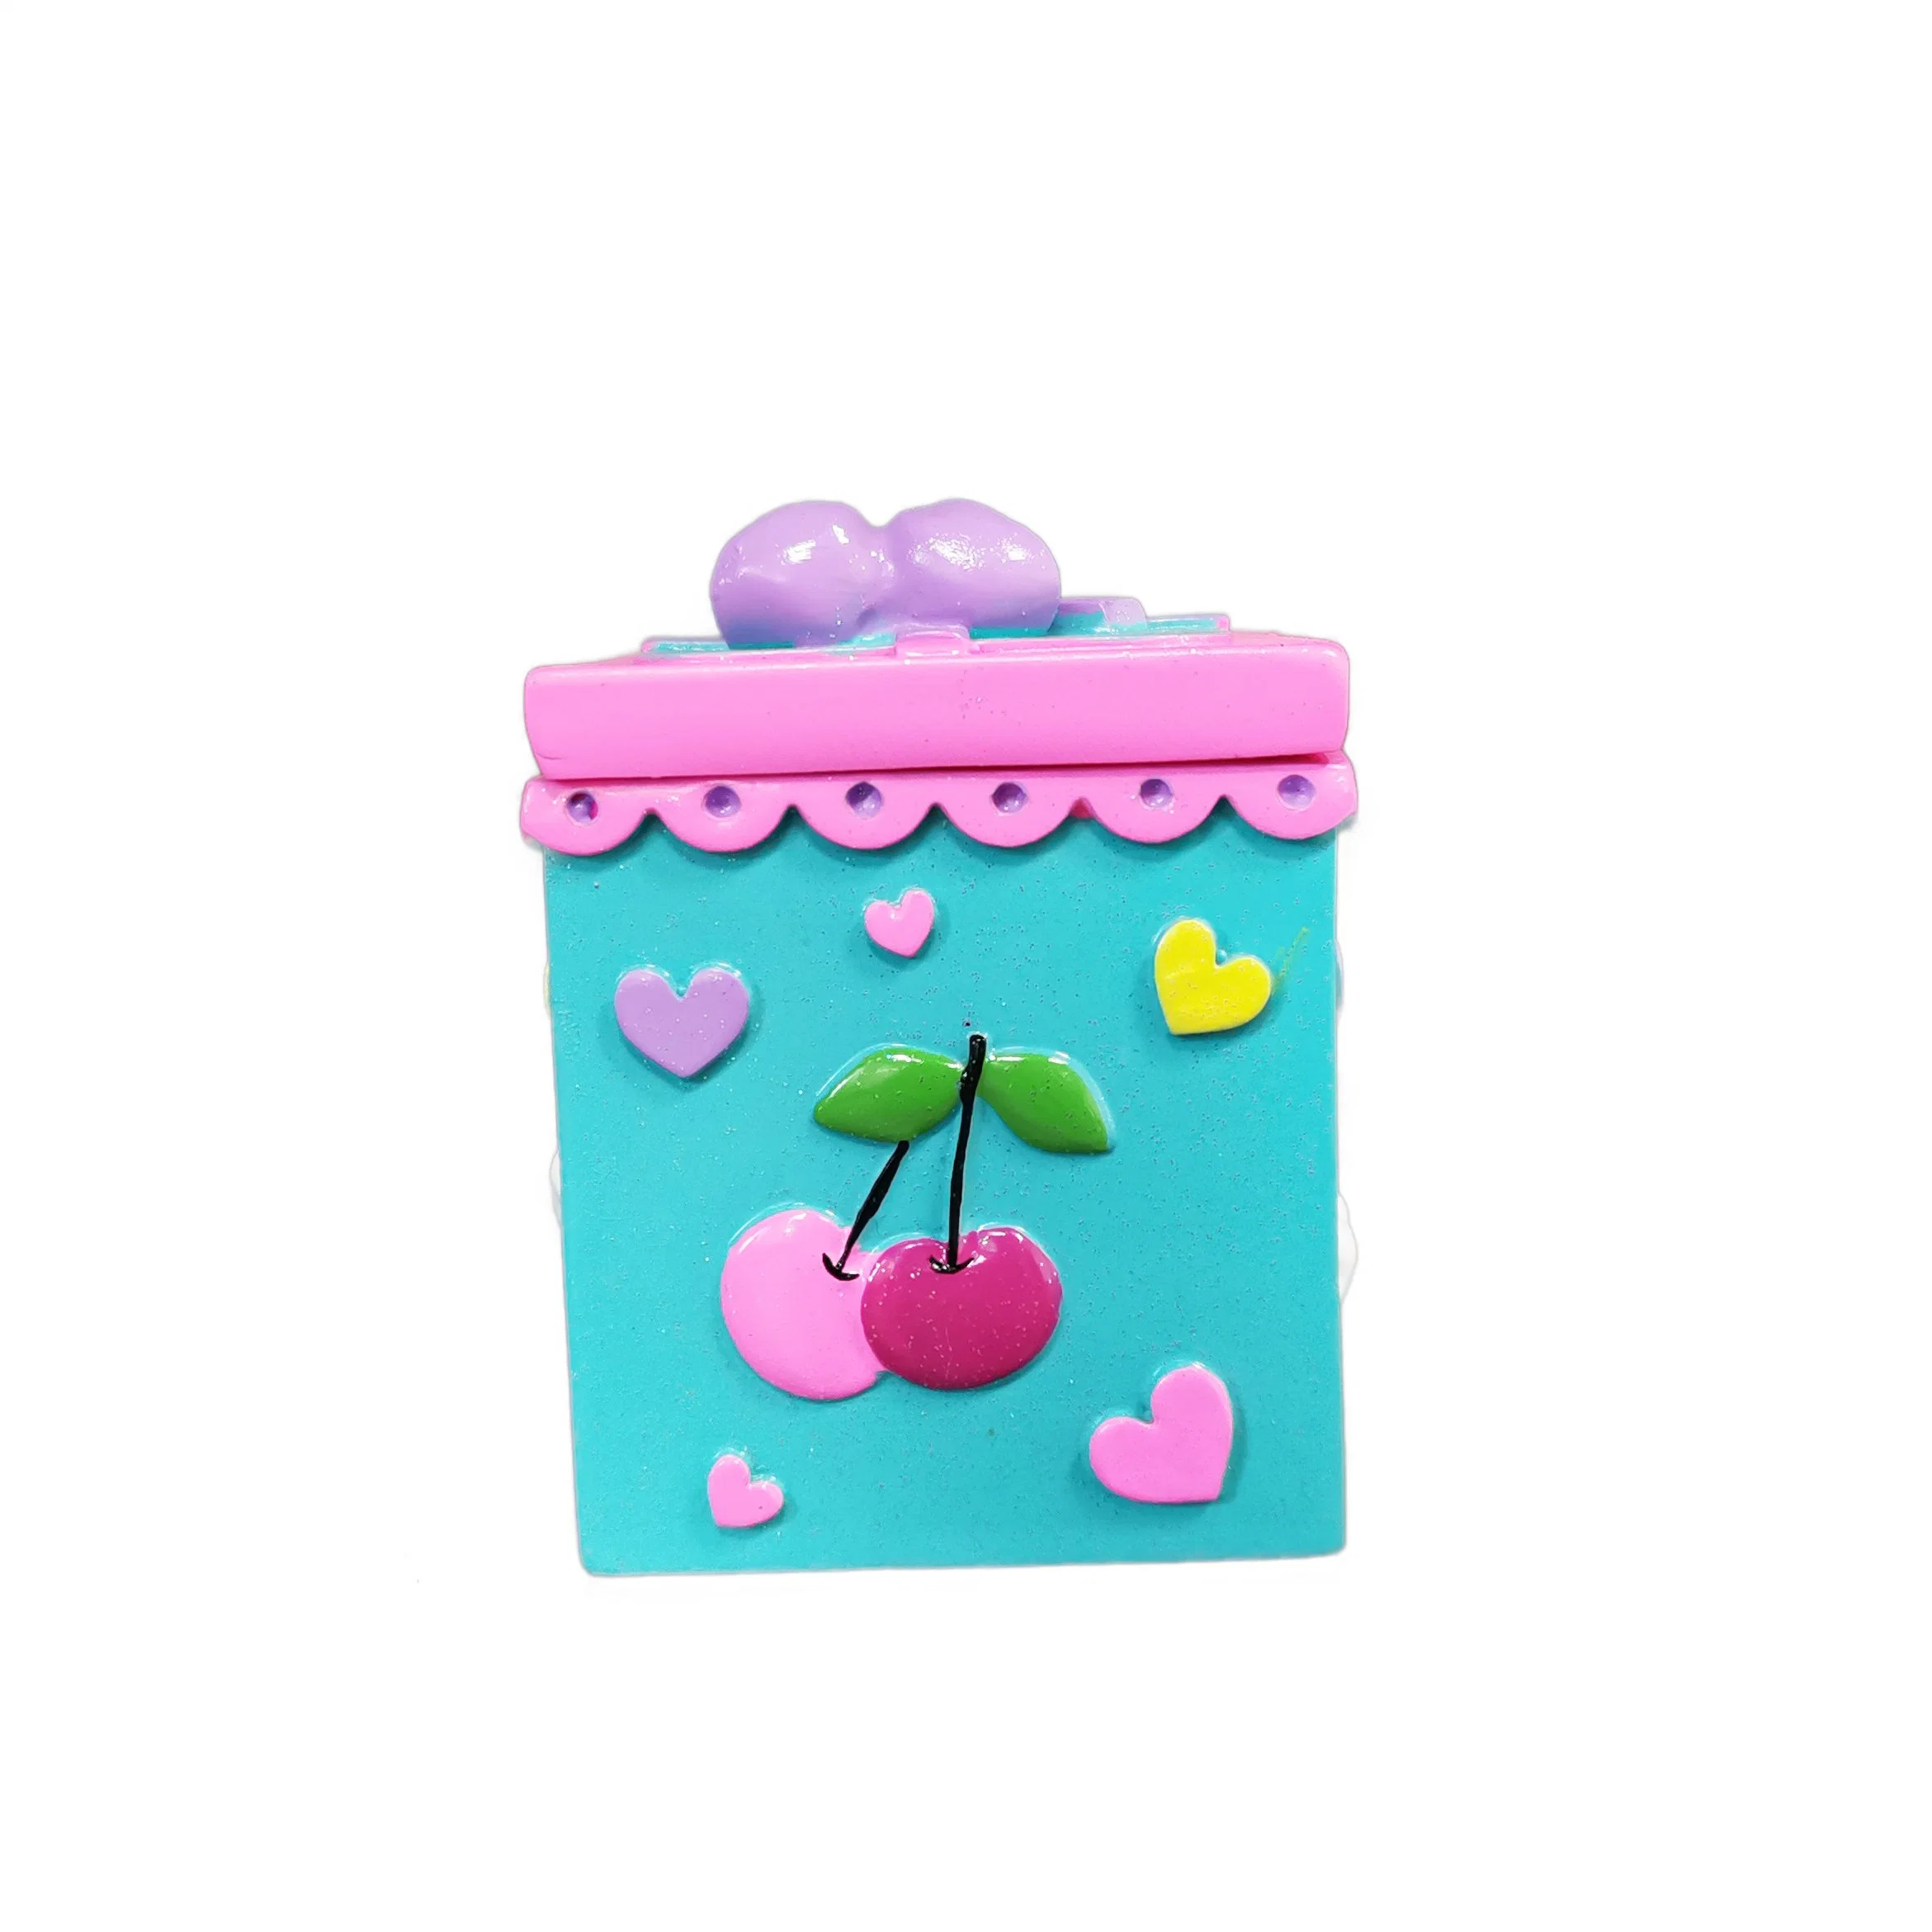 Custom Shaped Gift Crafts Wholesale/Supplier Home Decor Christmas Decoration Resin Square Box